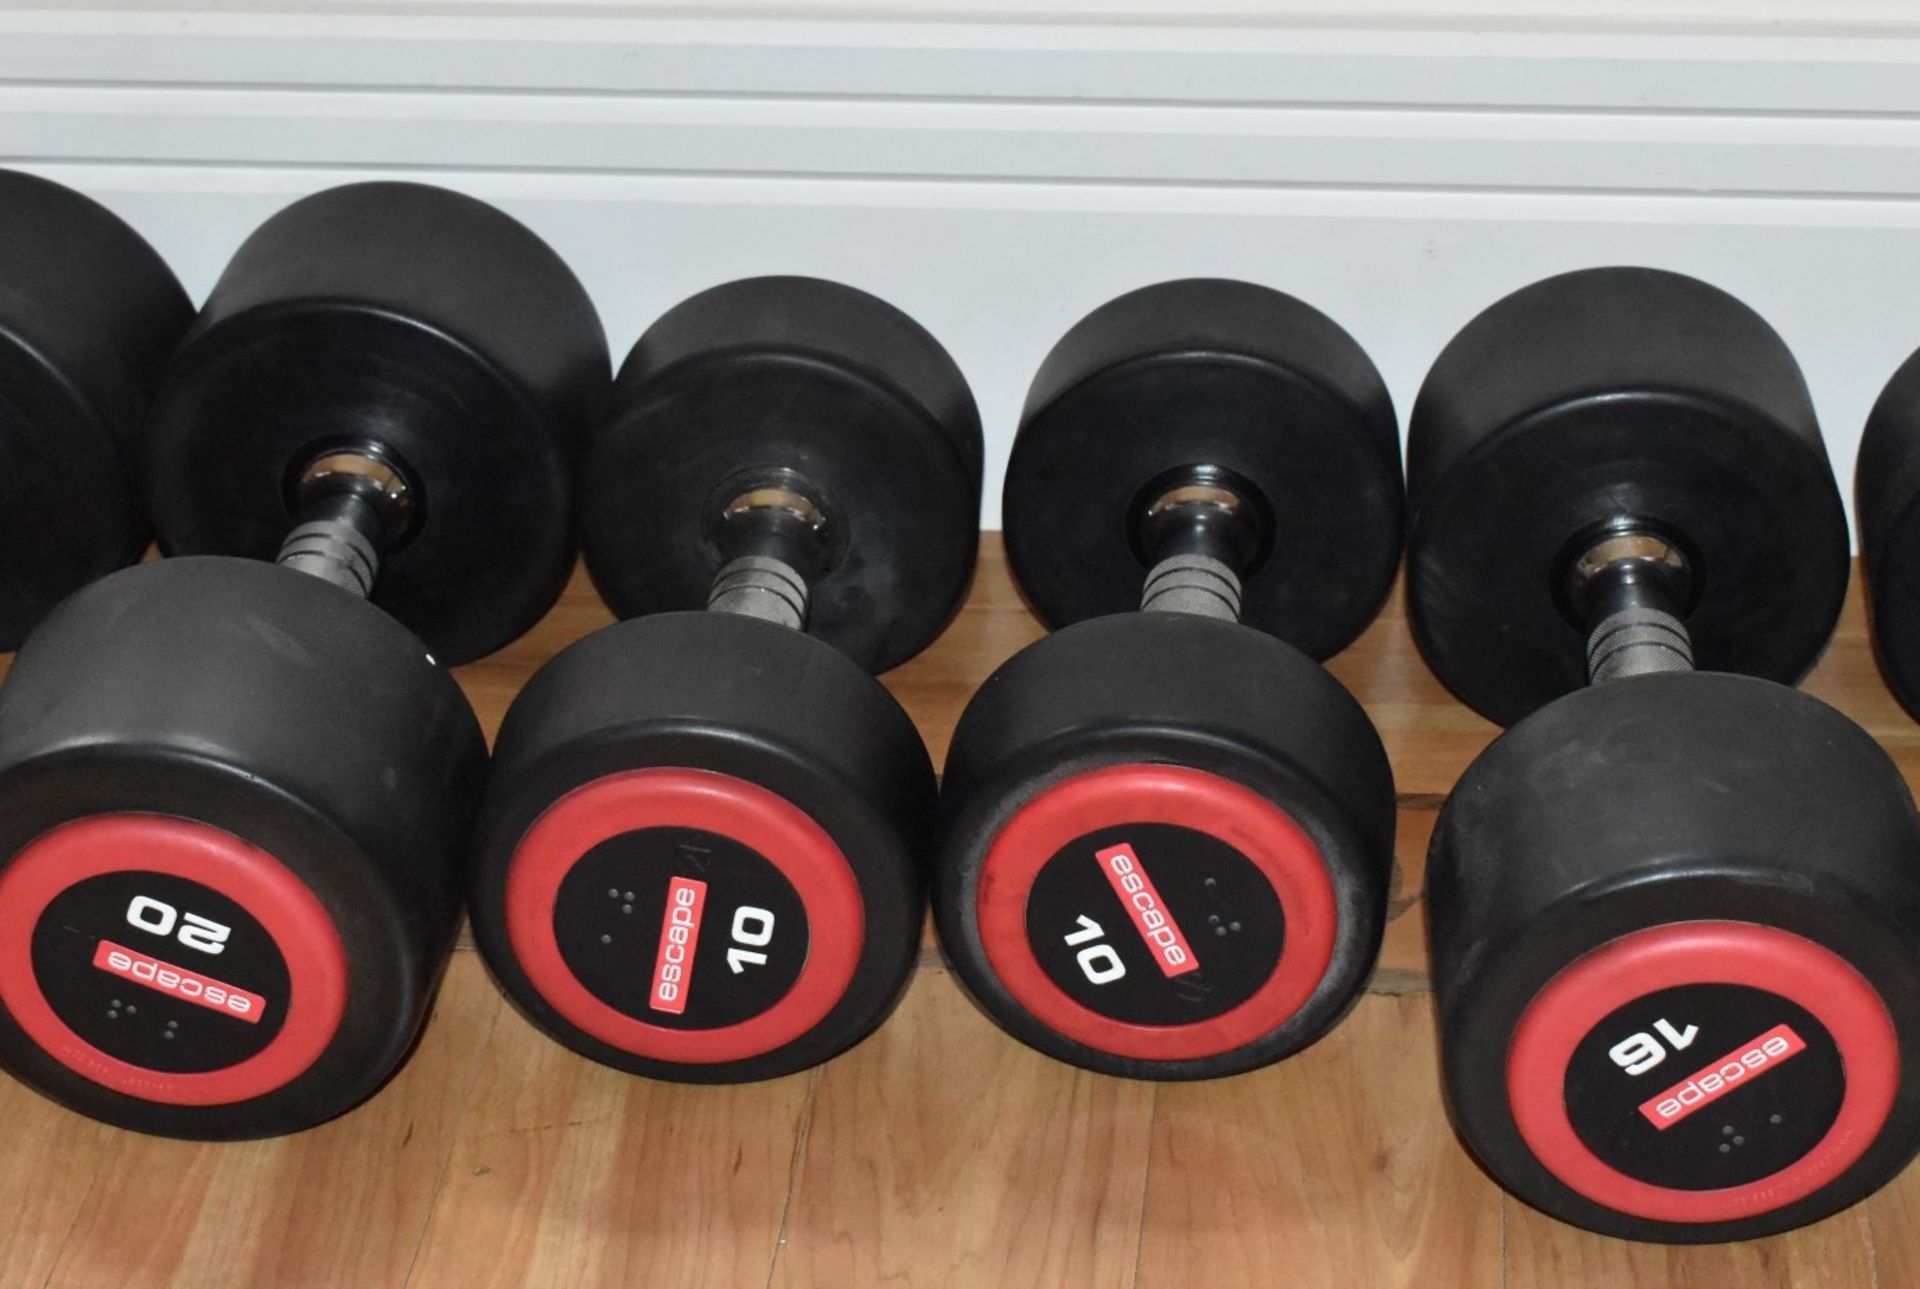 3 x Sets of Escape Polyurethane Dumbell Weights - Includes Pairs of 10kg, 16kg and 20kg Dumbells - 6 - Image 3 of 5